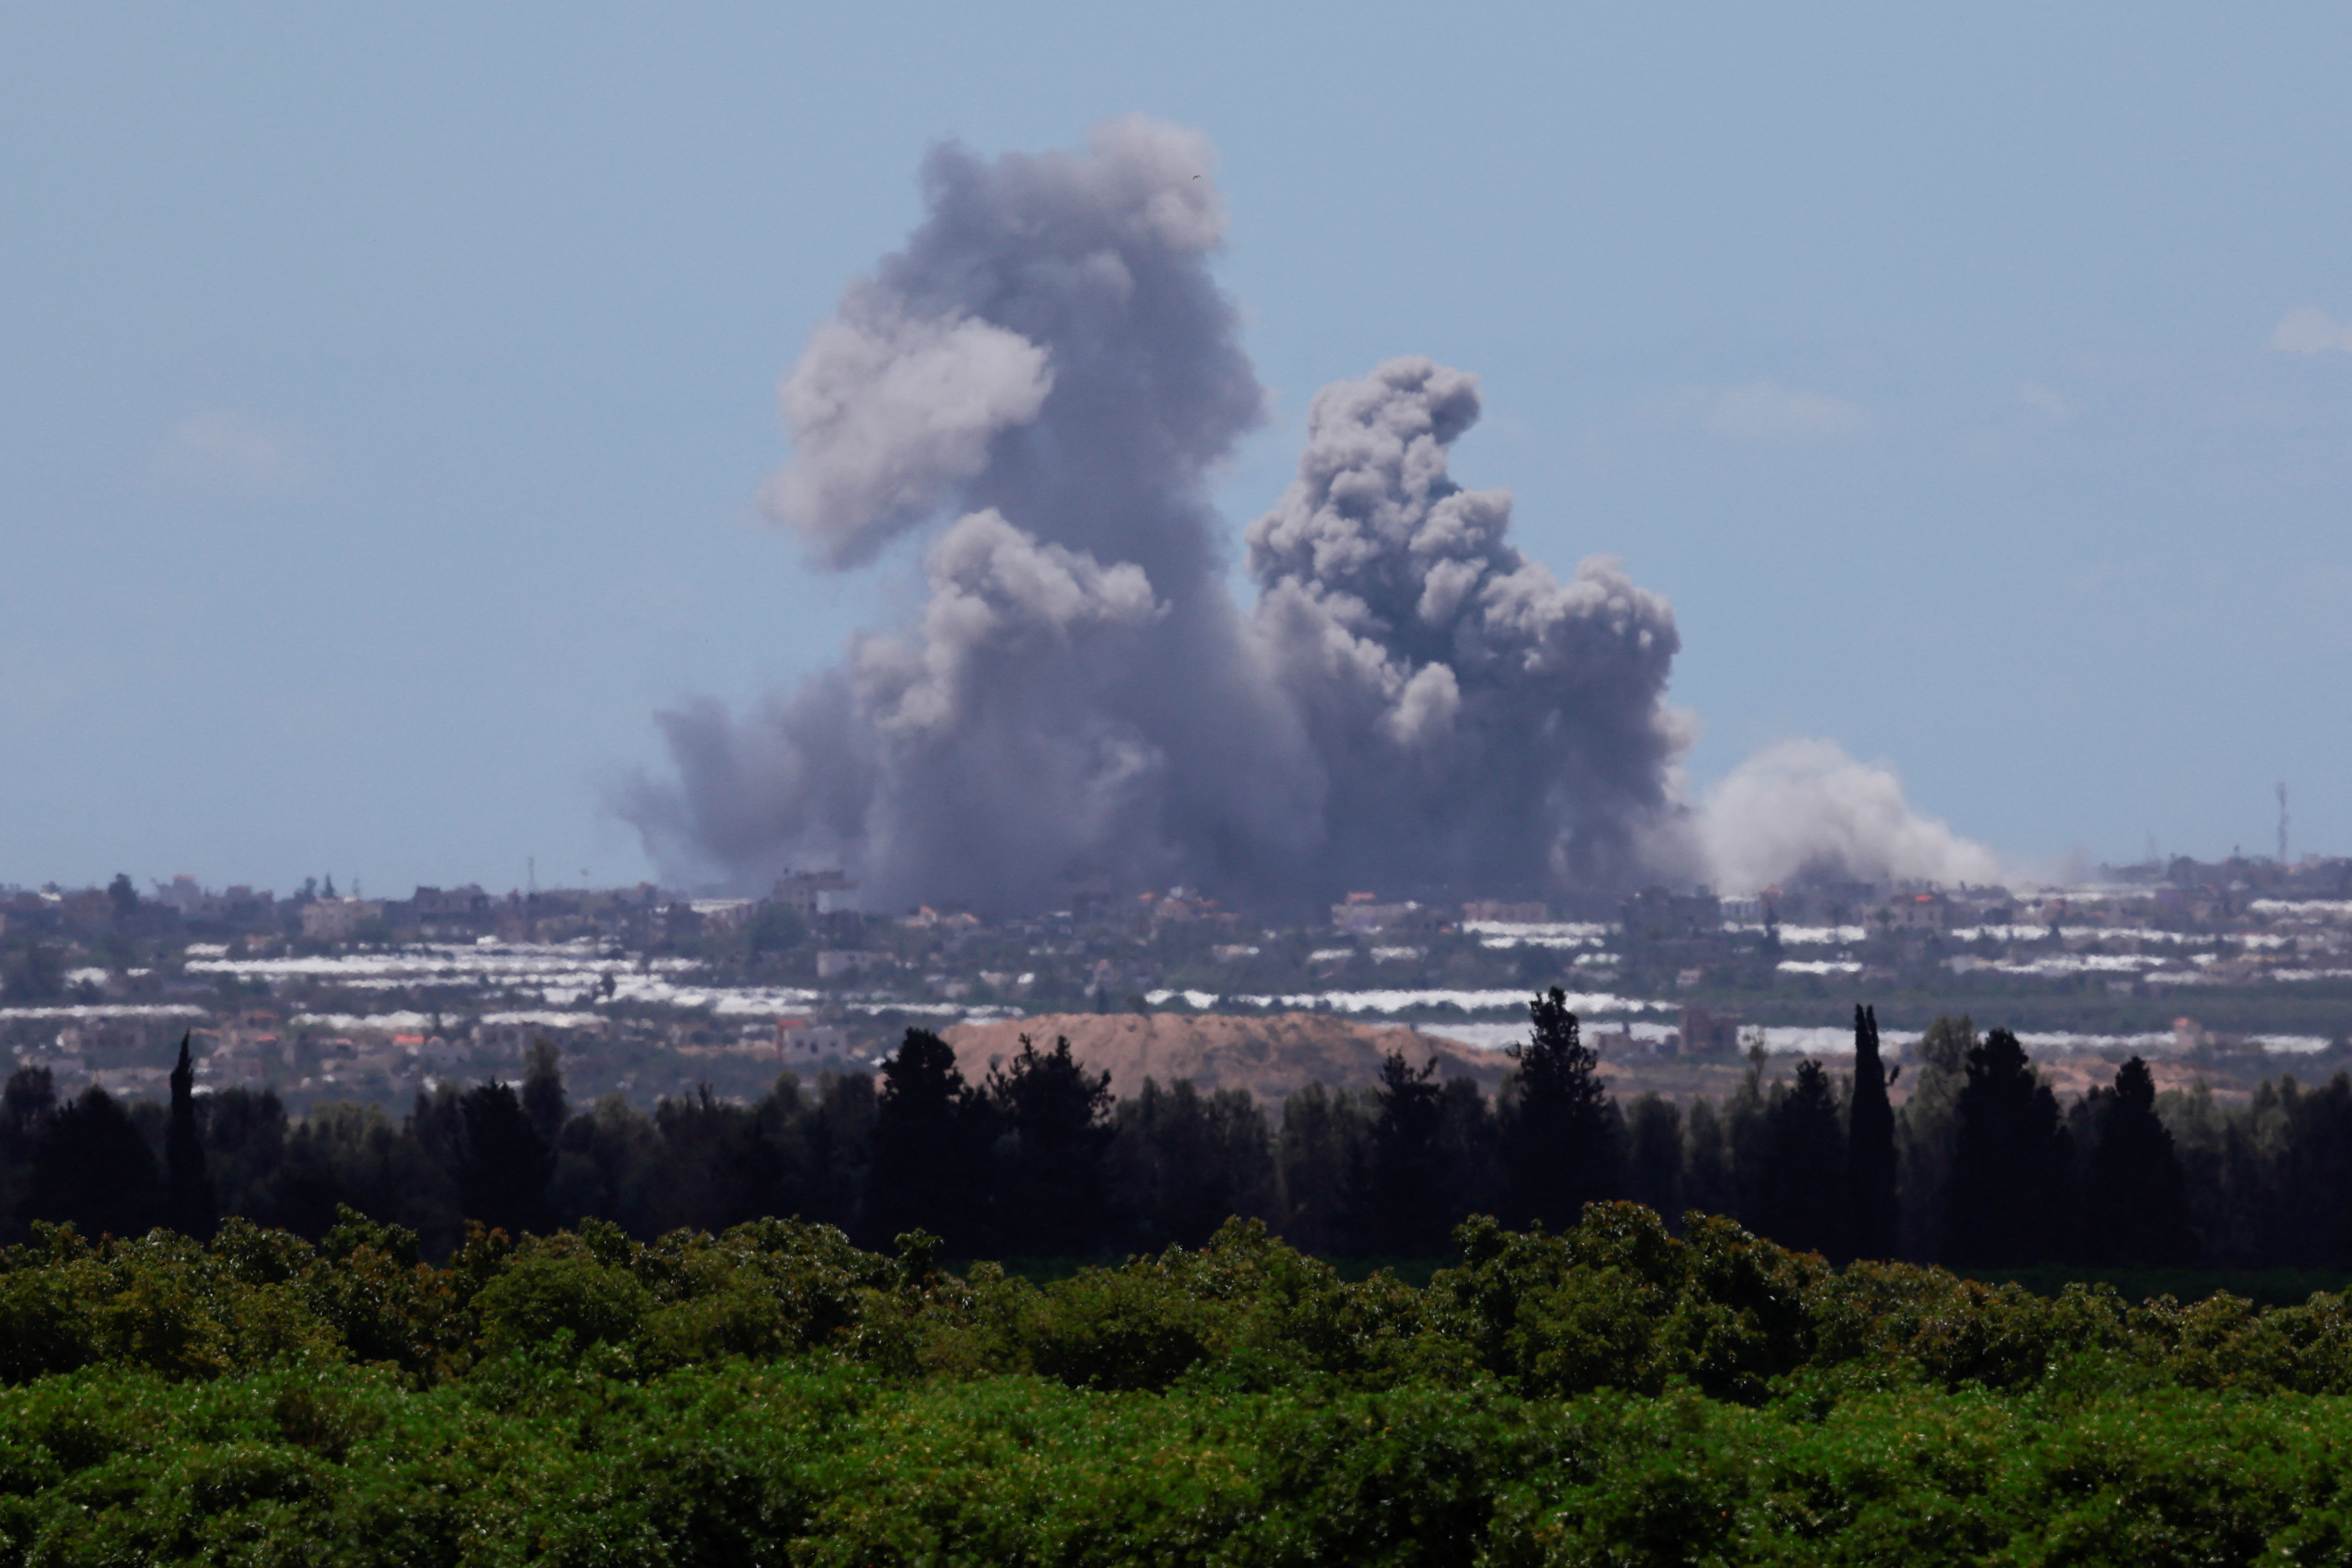 Smoke rises over Gaza following an explosion, amid the ongoing conflict between Israel and the Palestinian Islamist group Hamas, as seen from Israel